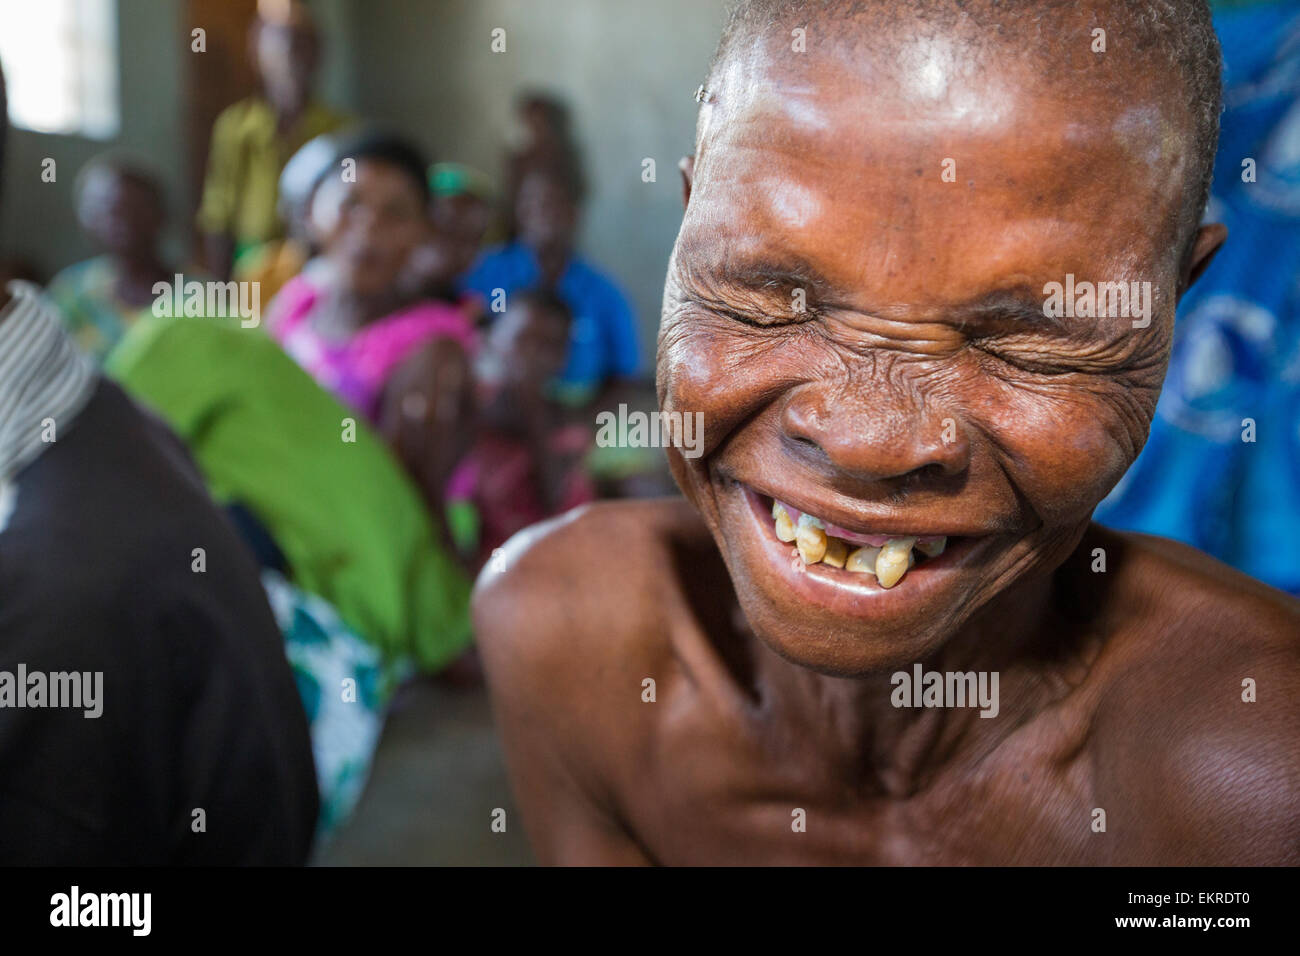 In mid January 2015, a three day period of excessive rain brought unprecedented floods to the small poor African country of Malawi. It displaced nearly quarter of a million people, devastated 64,000 hectares of land, and killed several hundred people. This shot shows an old woman in a refugee camp near Chikwawa. Stock Photo